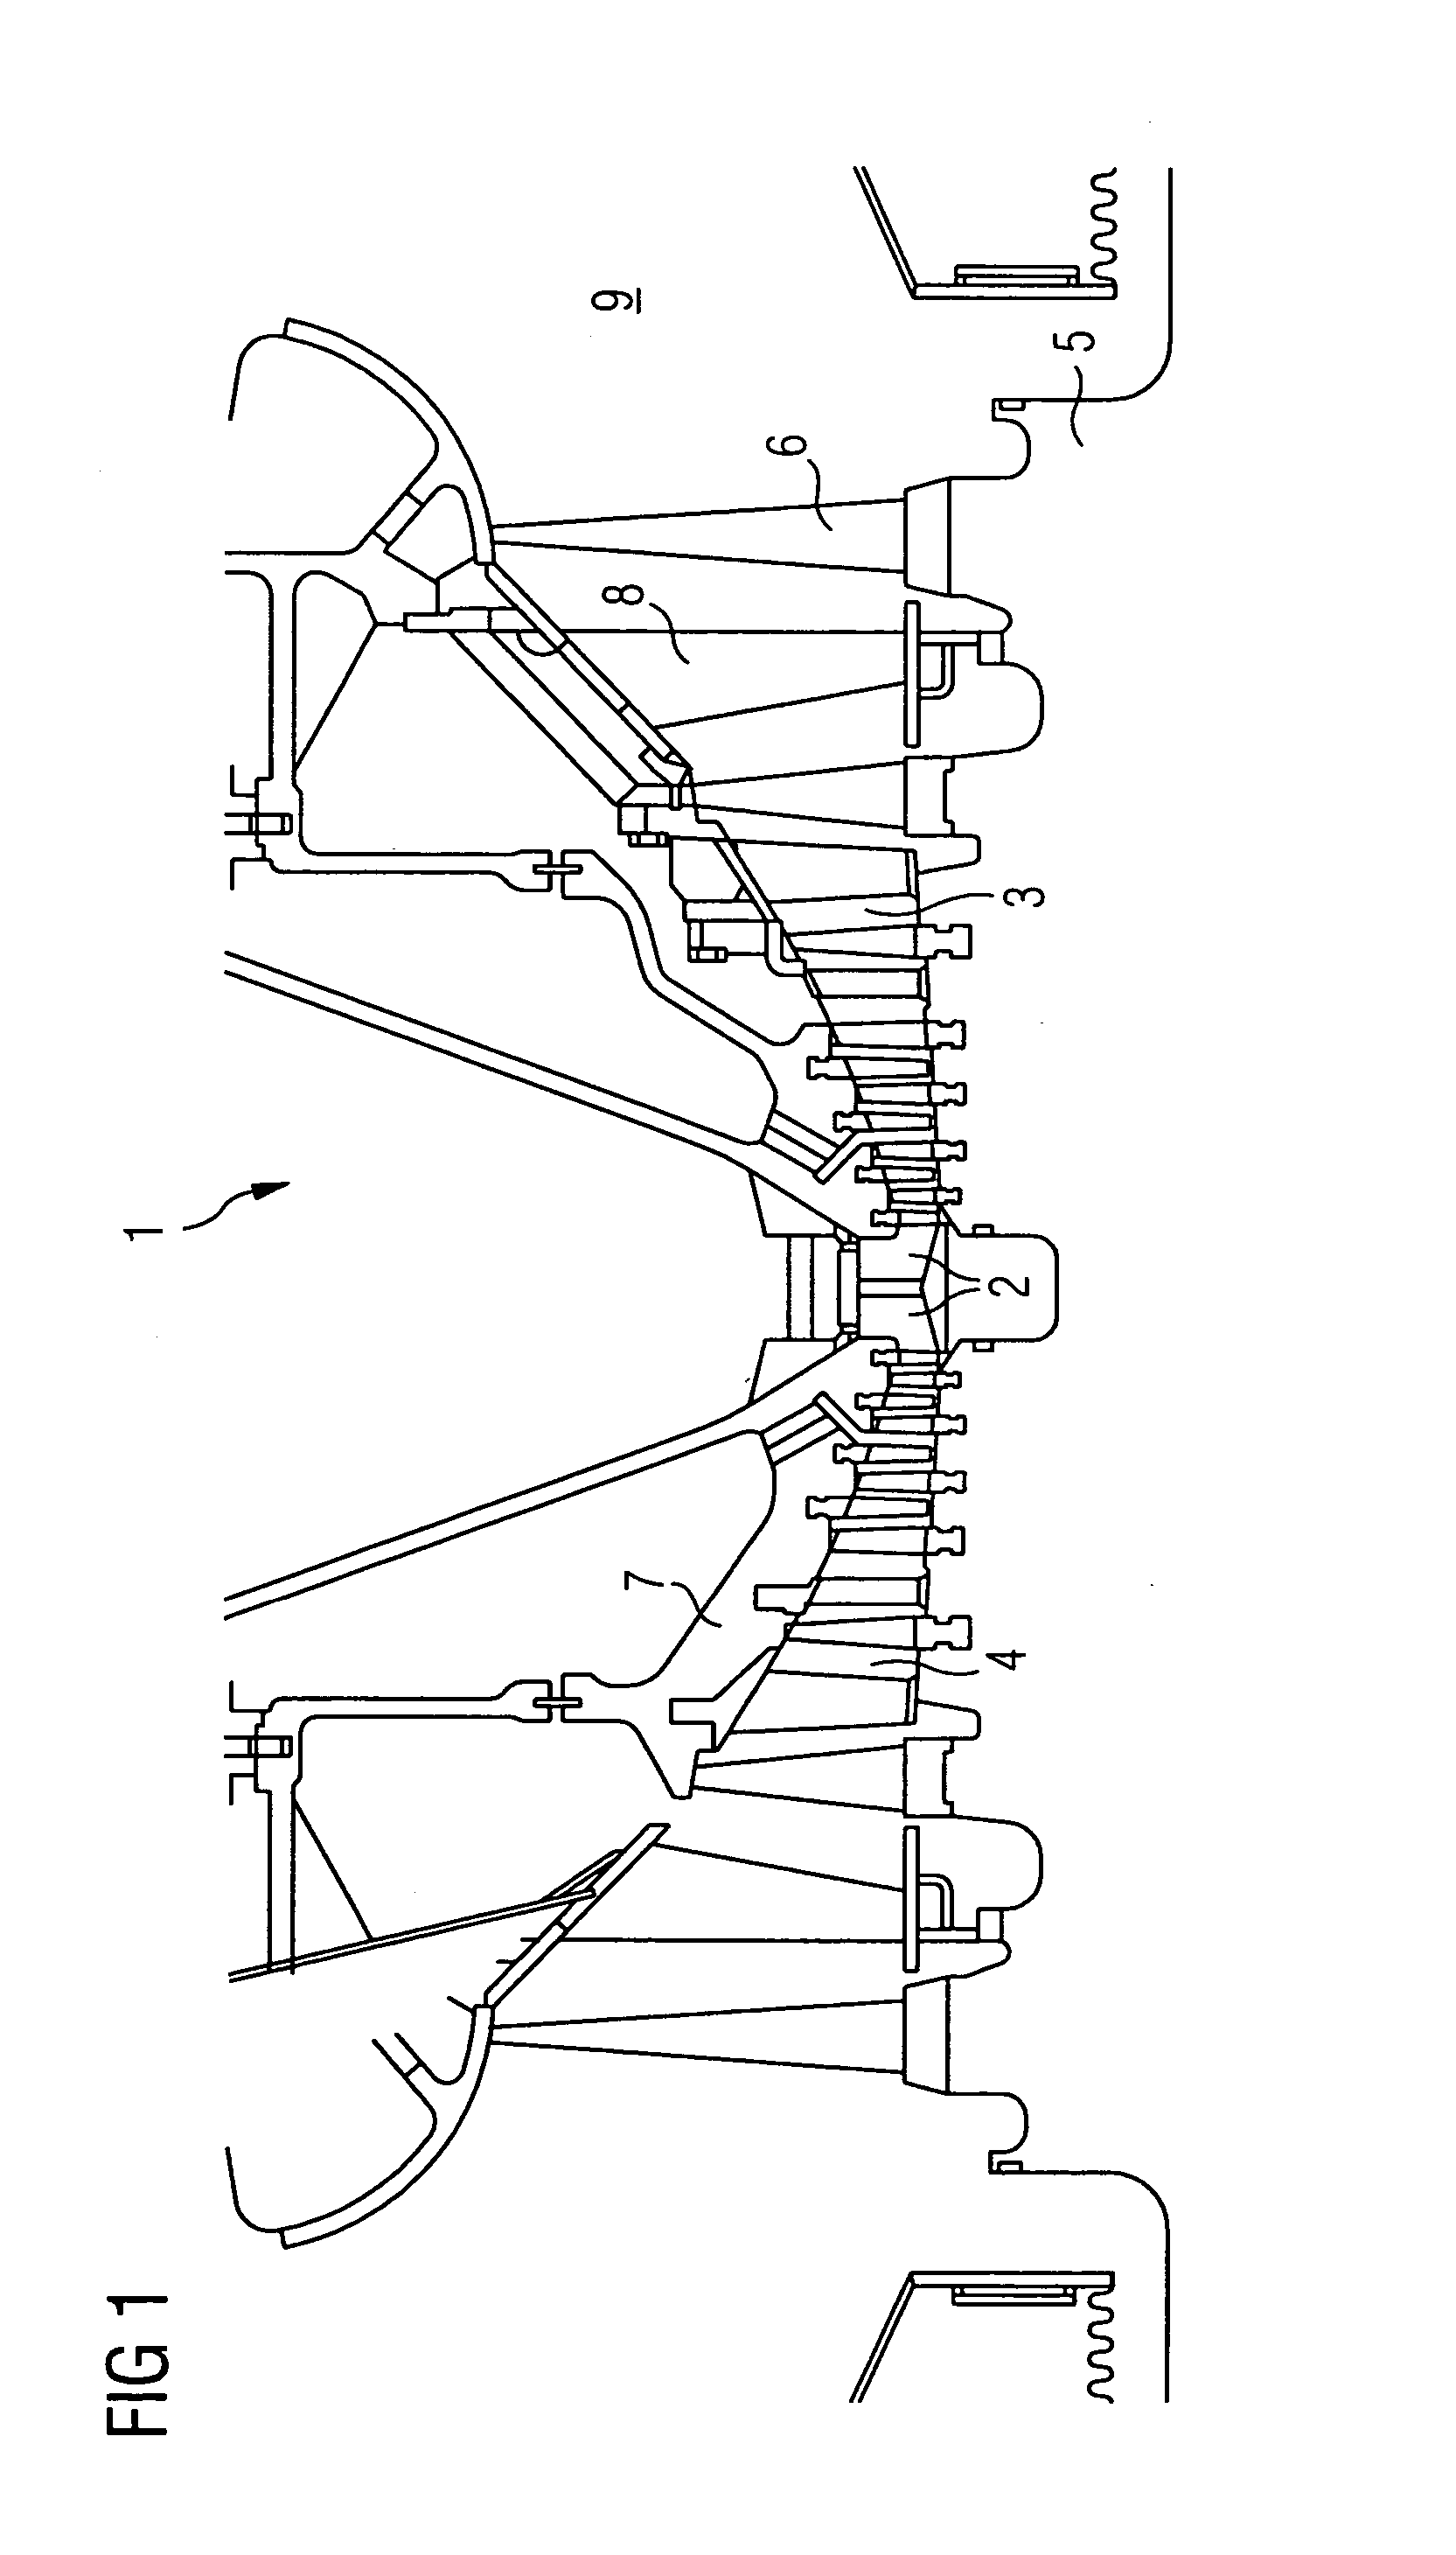 Moving-blade row for fluid-flow machines